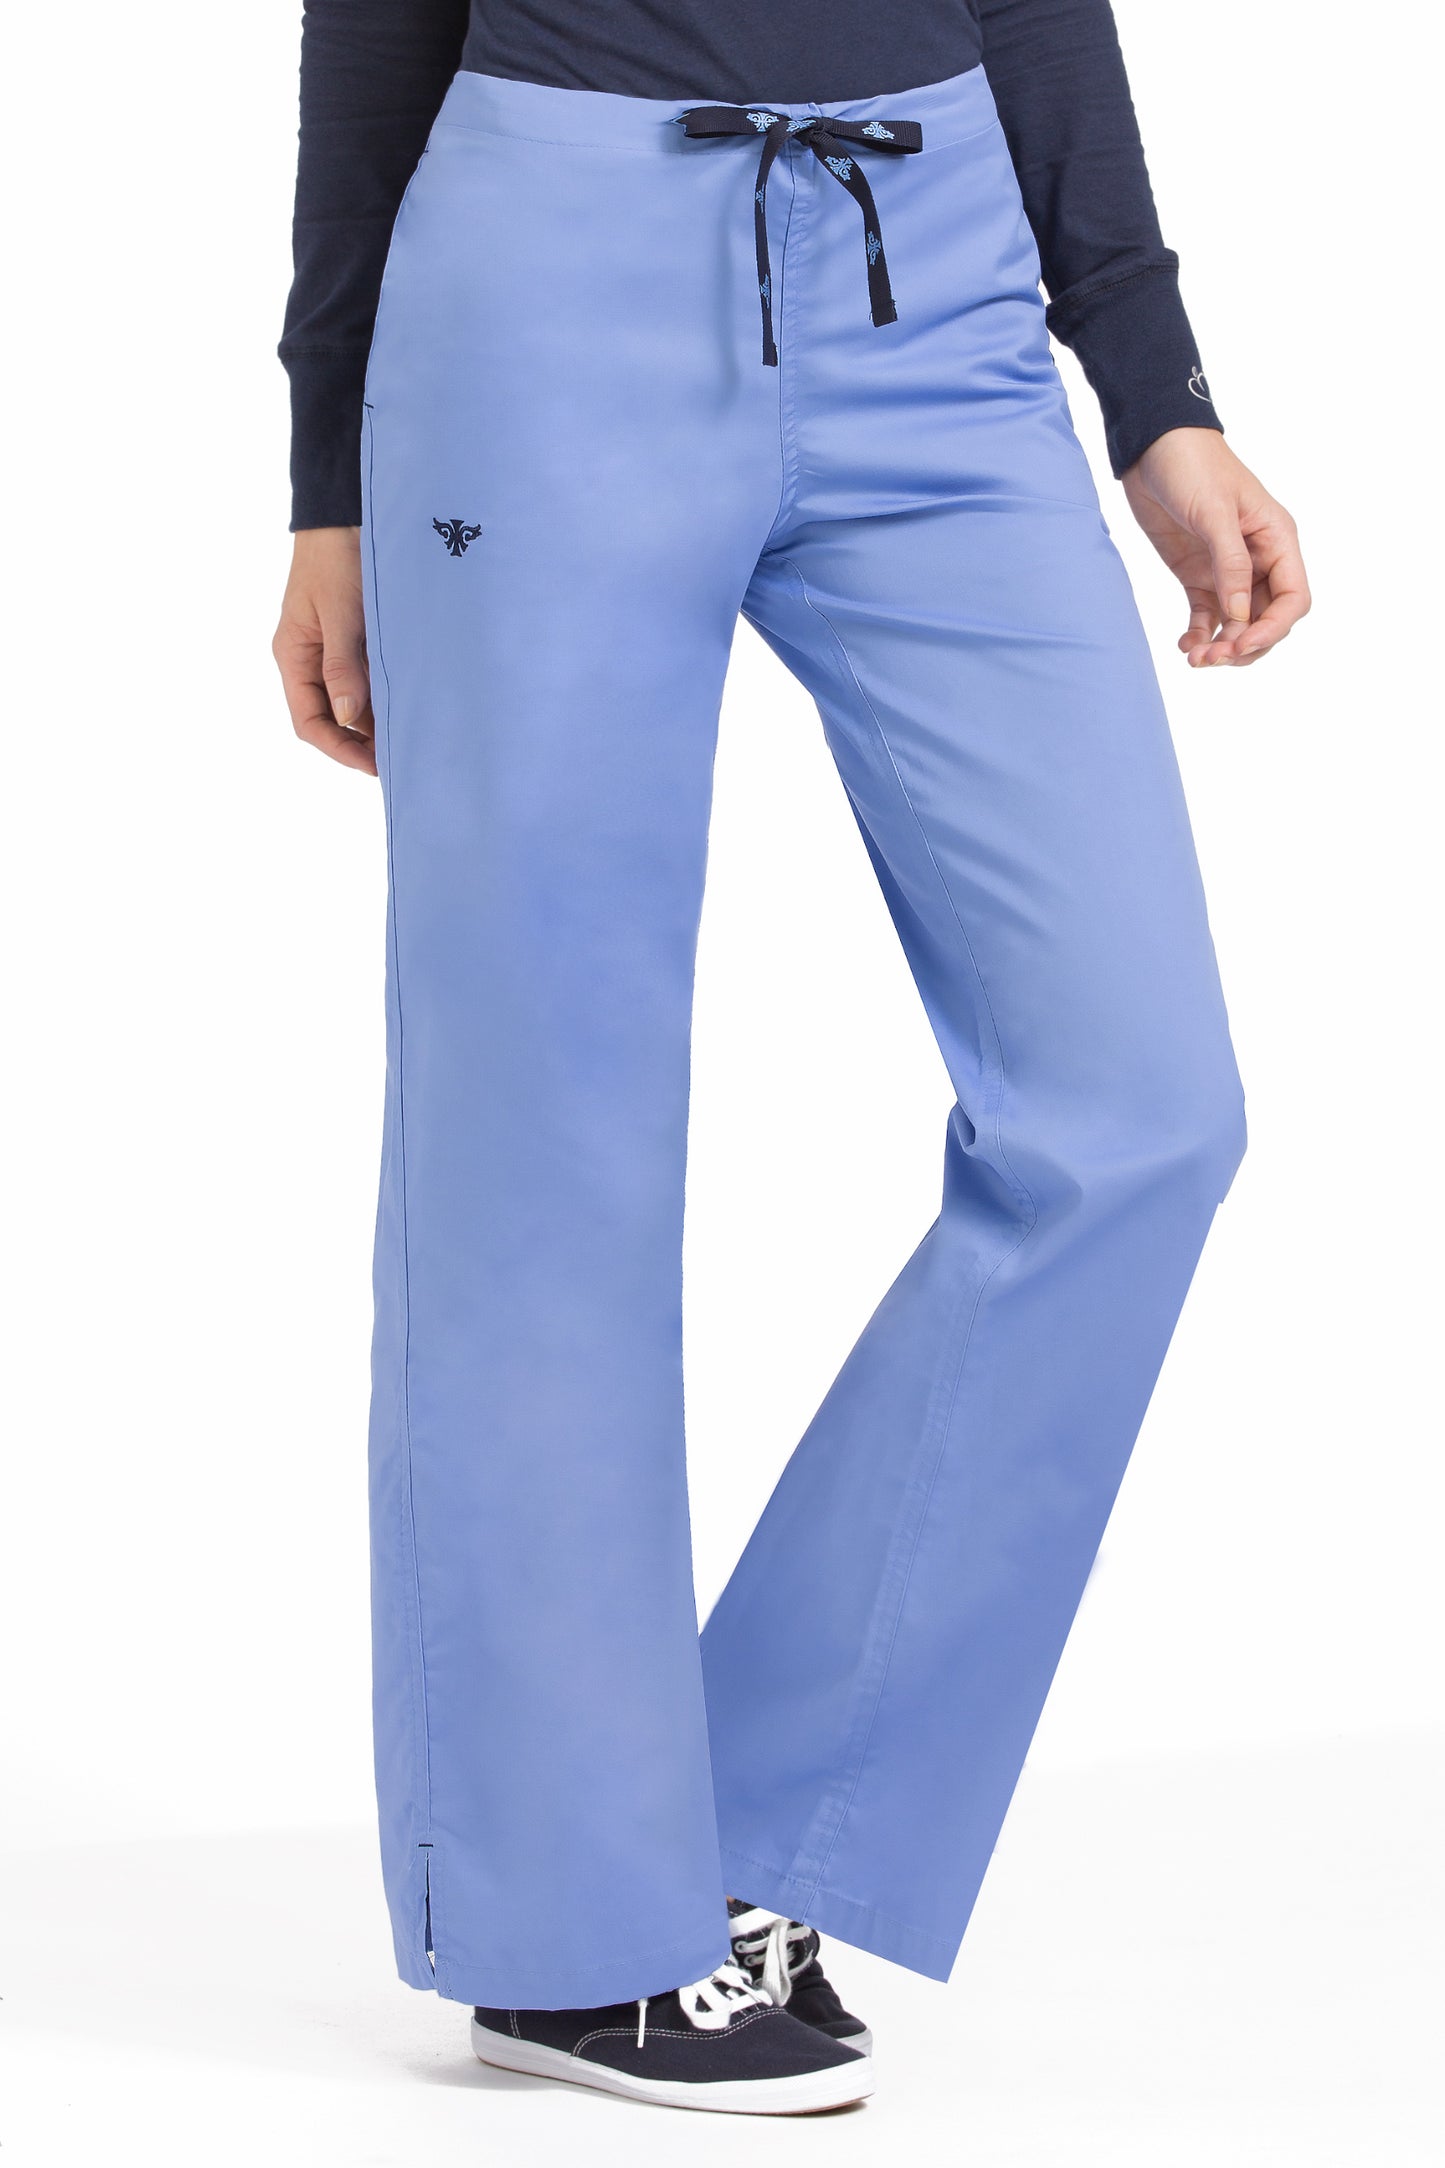 Med Couture Signature Drawstring Pant in Ceil Navy at Parker's Clothing and Shoes. Med Couture Sale Scrub Pants.